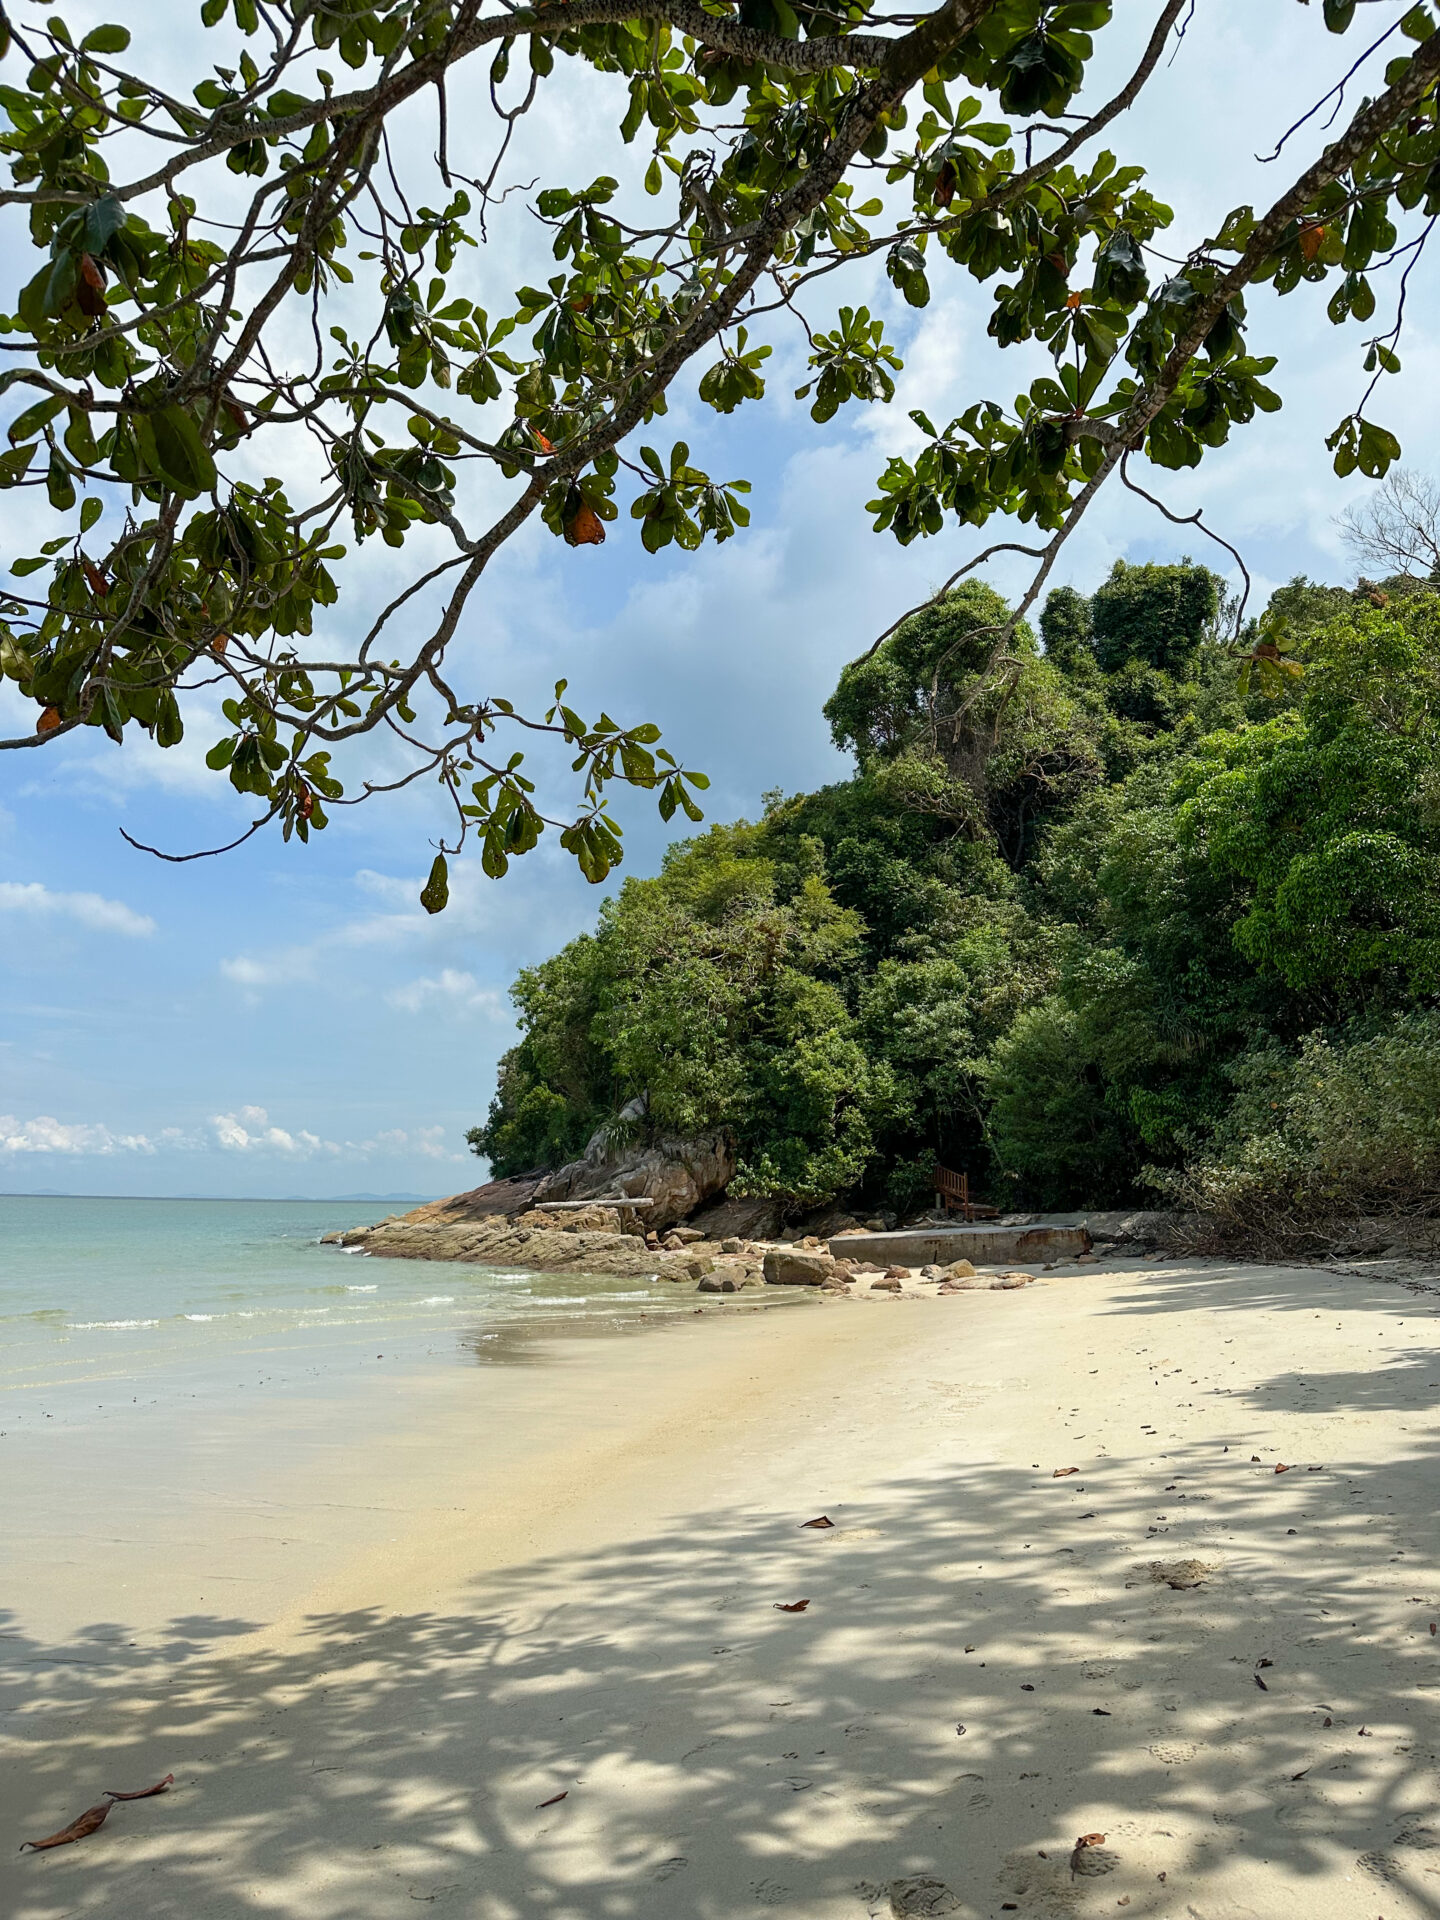 Penang National Park is one of the best places to visit in Malaysia